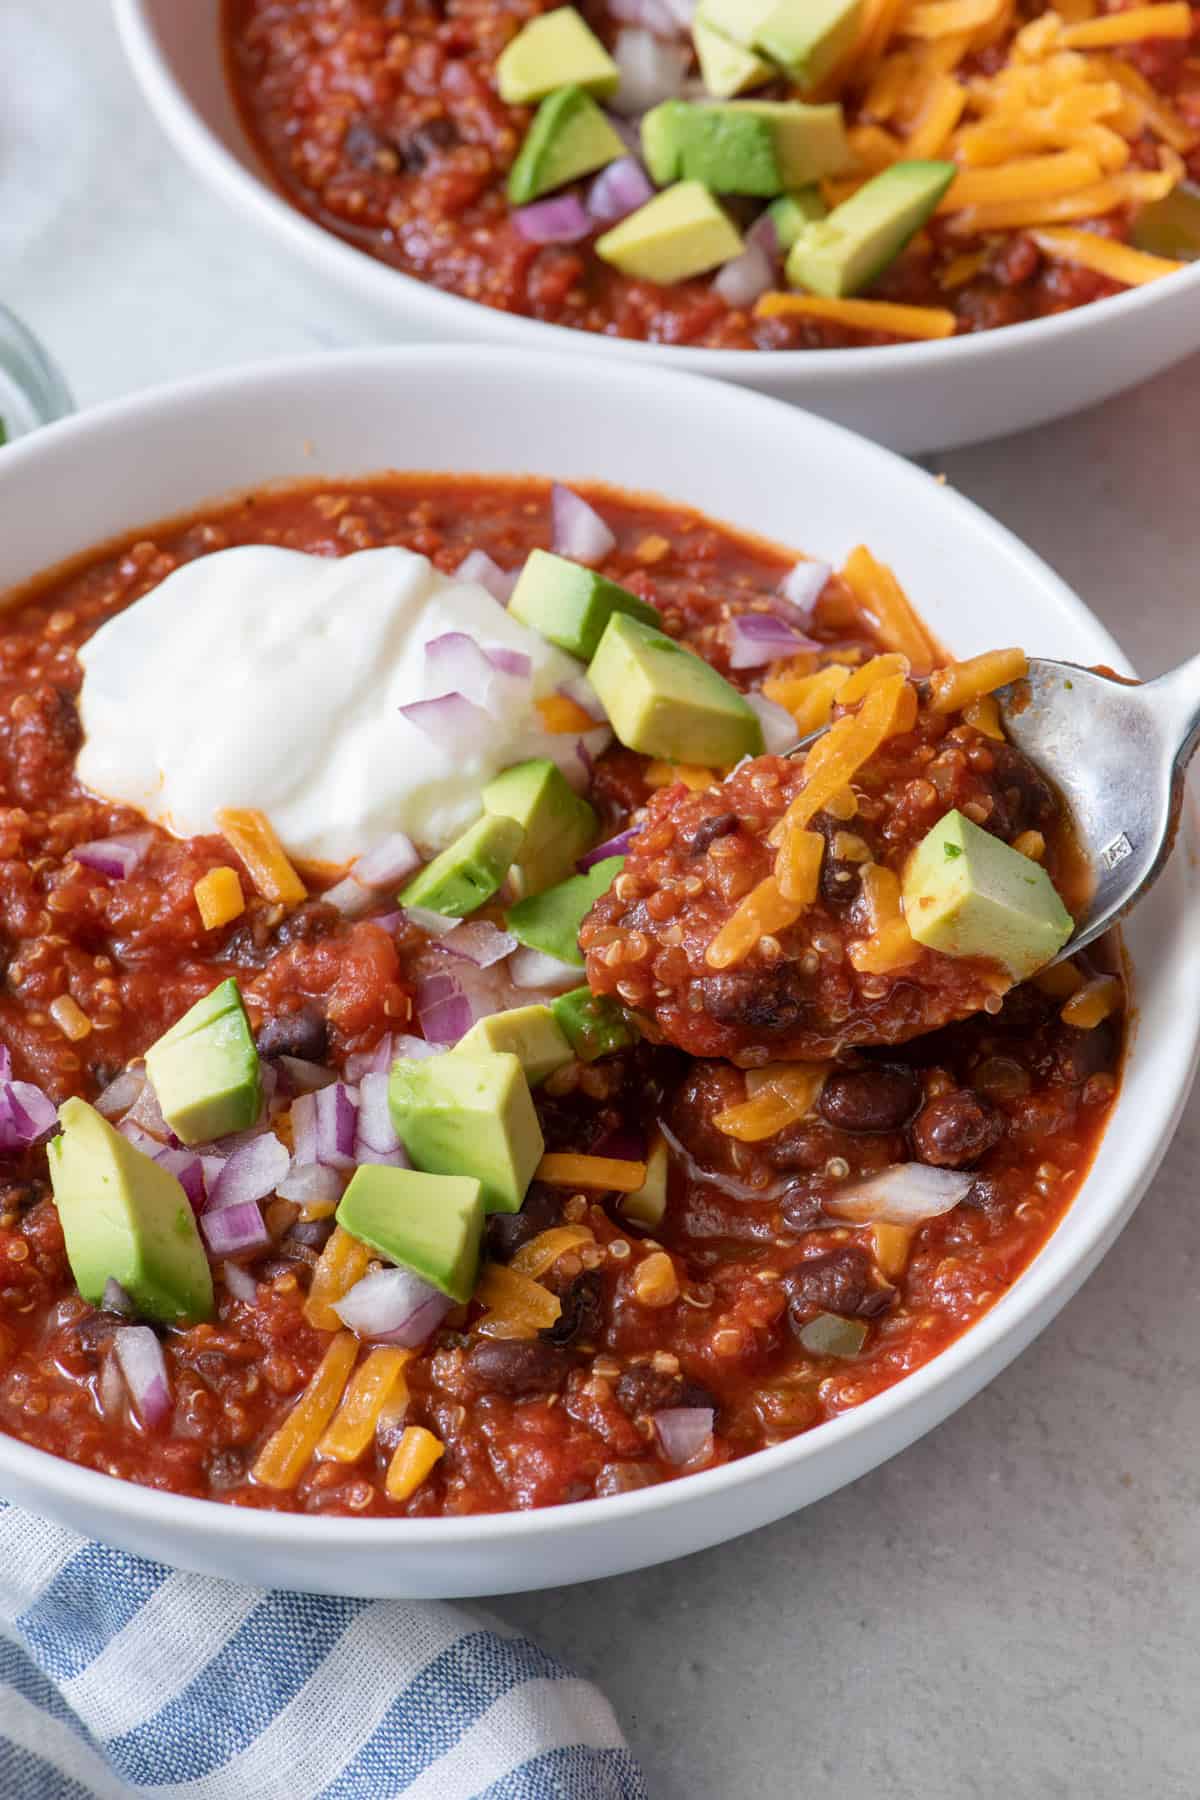 Two bowls of chili with one close up with a spoon scooping up some, garnished with greek yogurt, chopped avocado and red onions, and shredded cheese.